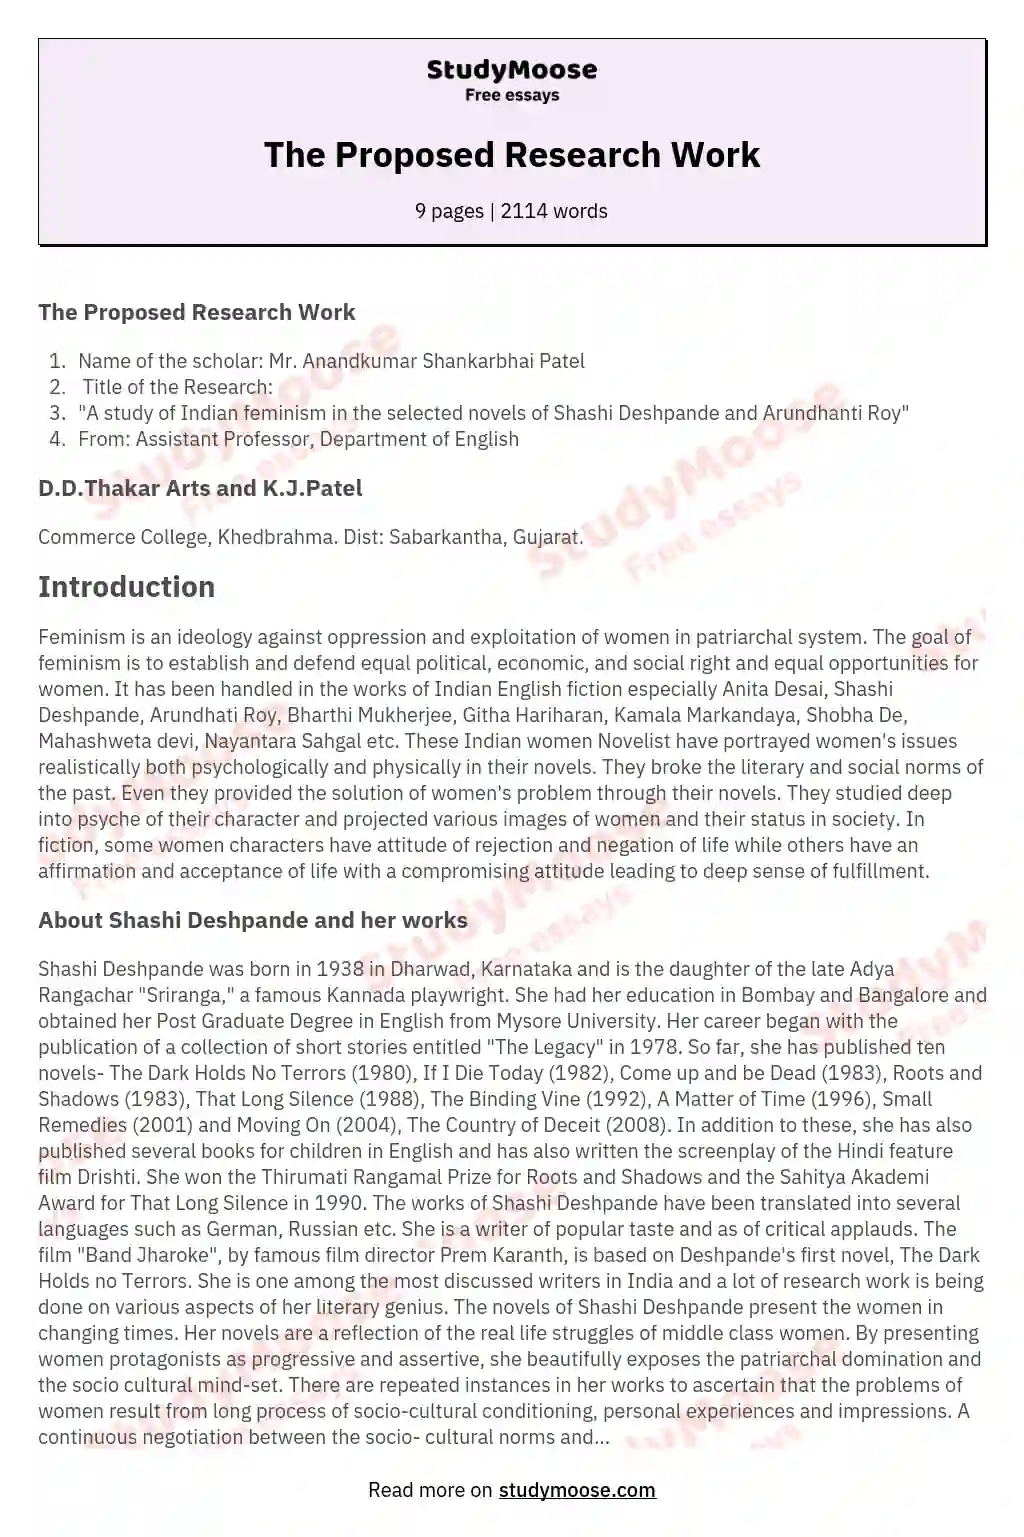 The Proposed Research Work essay